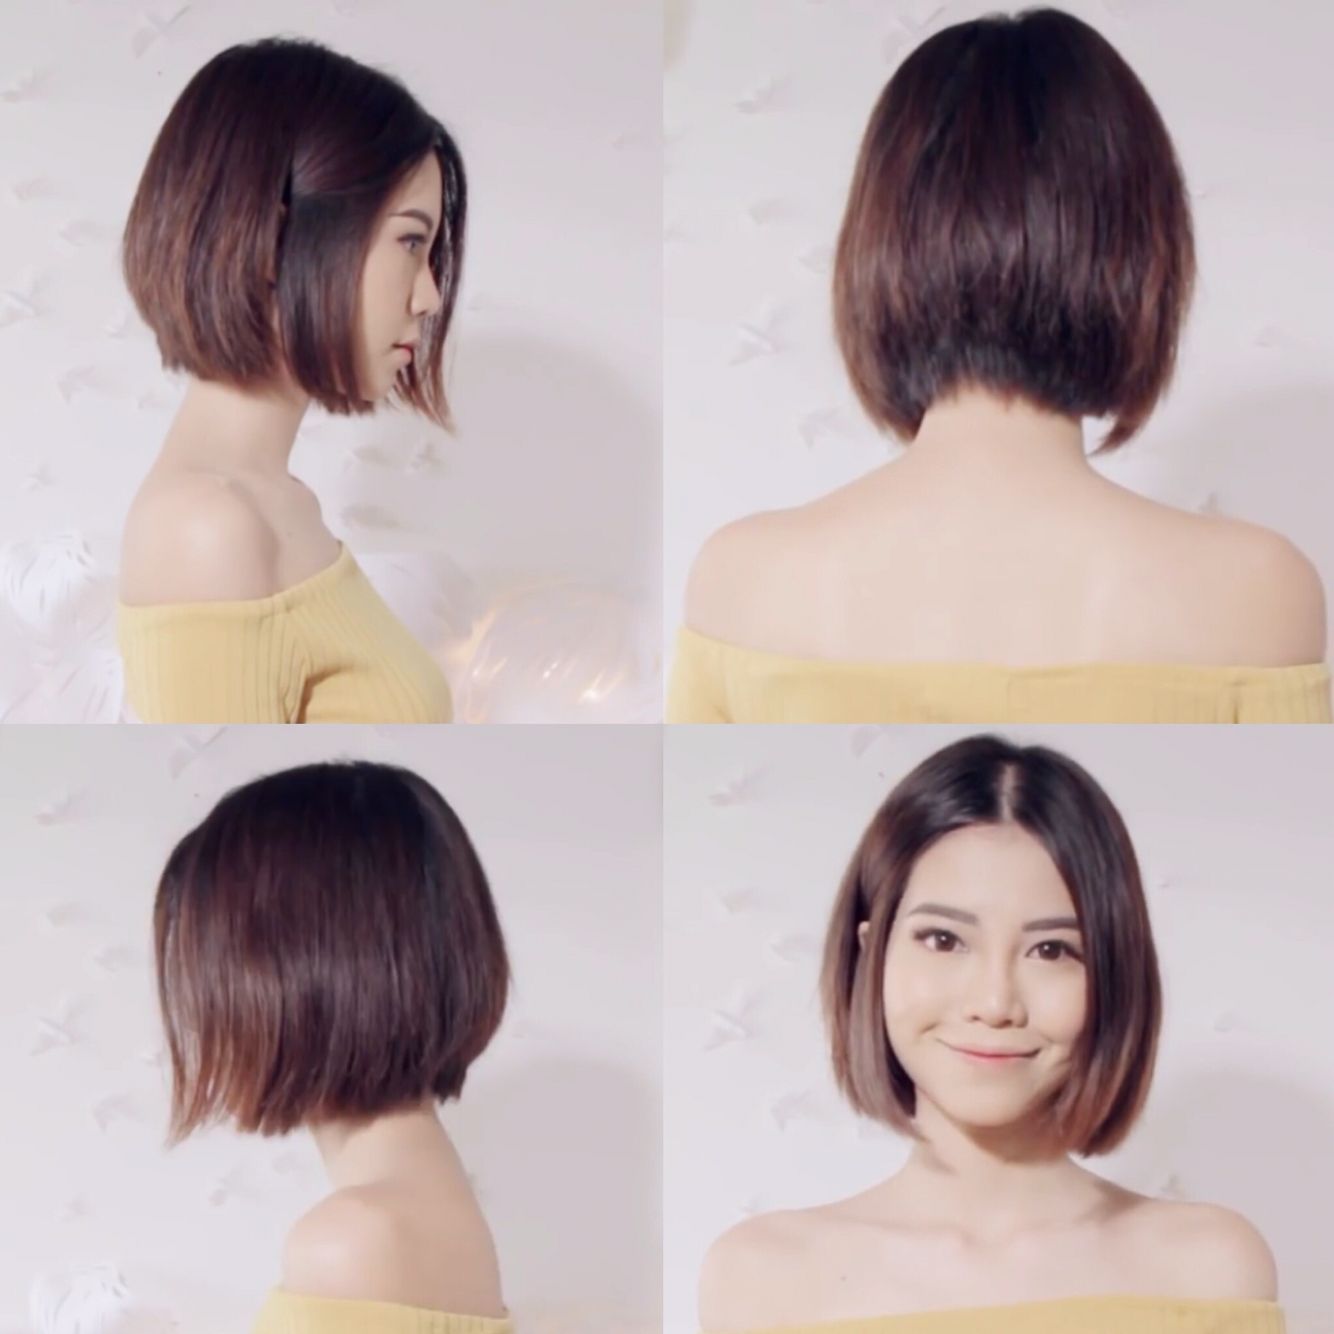 4-Wheel D. recomended styling Hairstyles mature